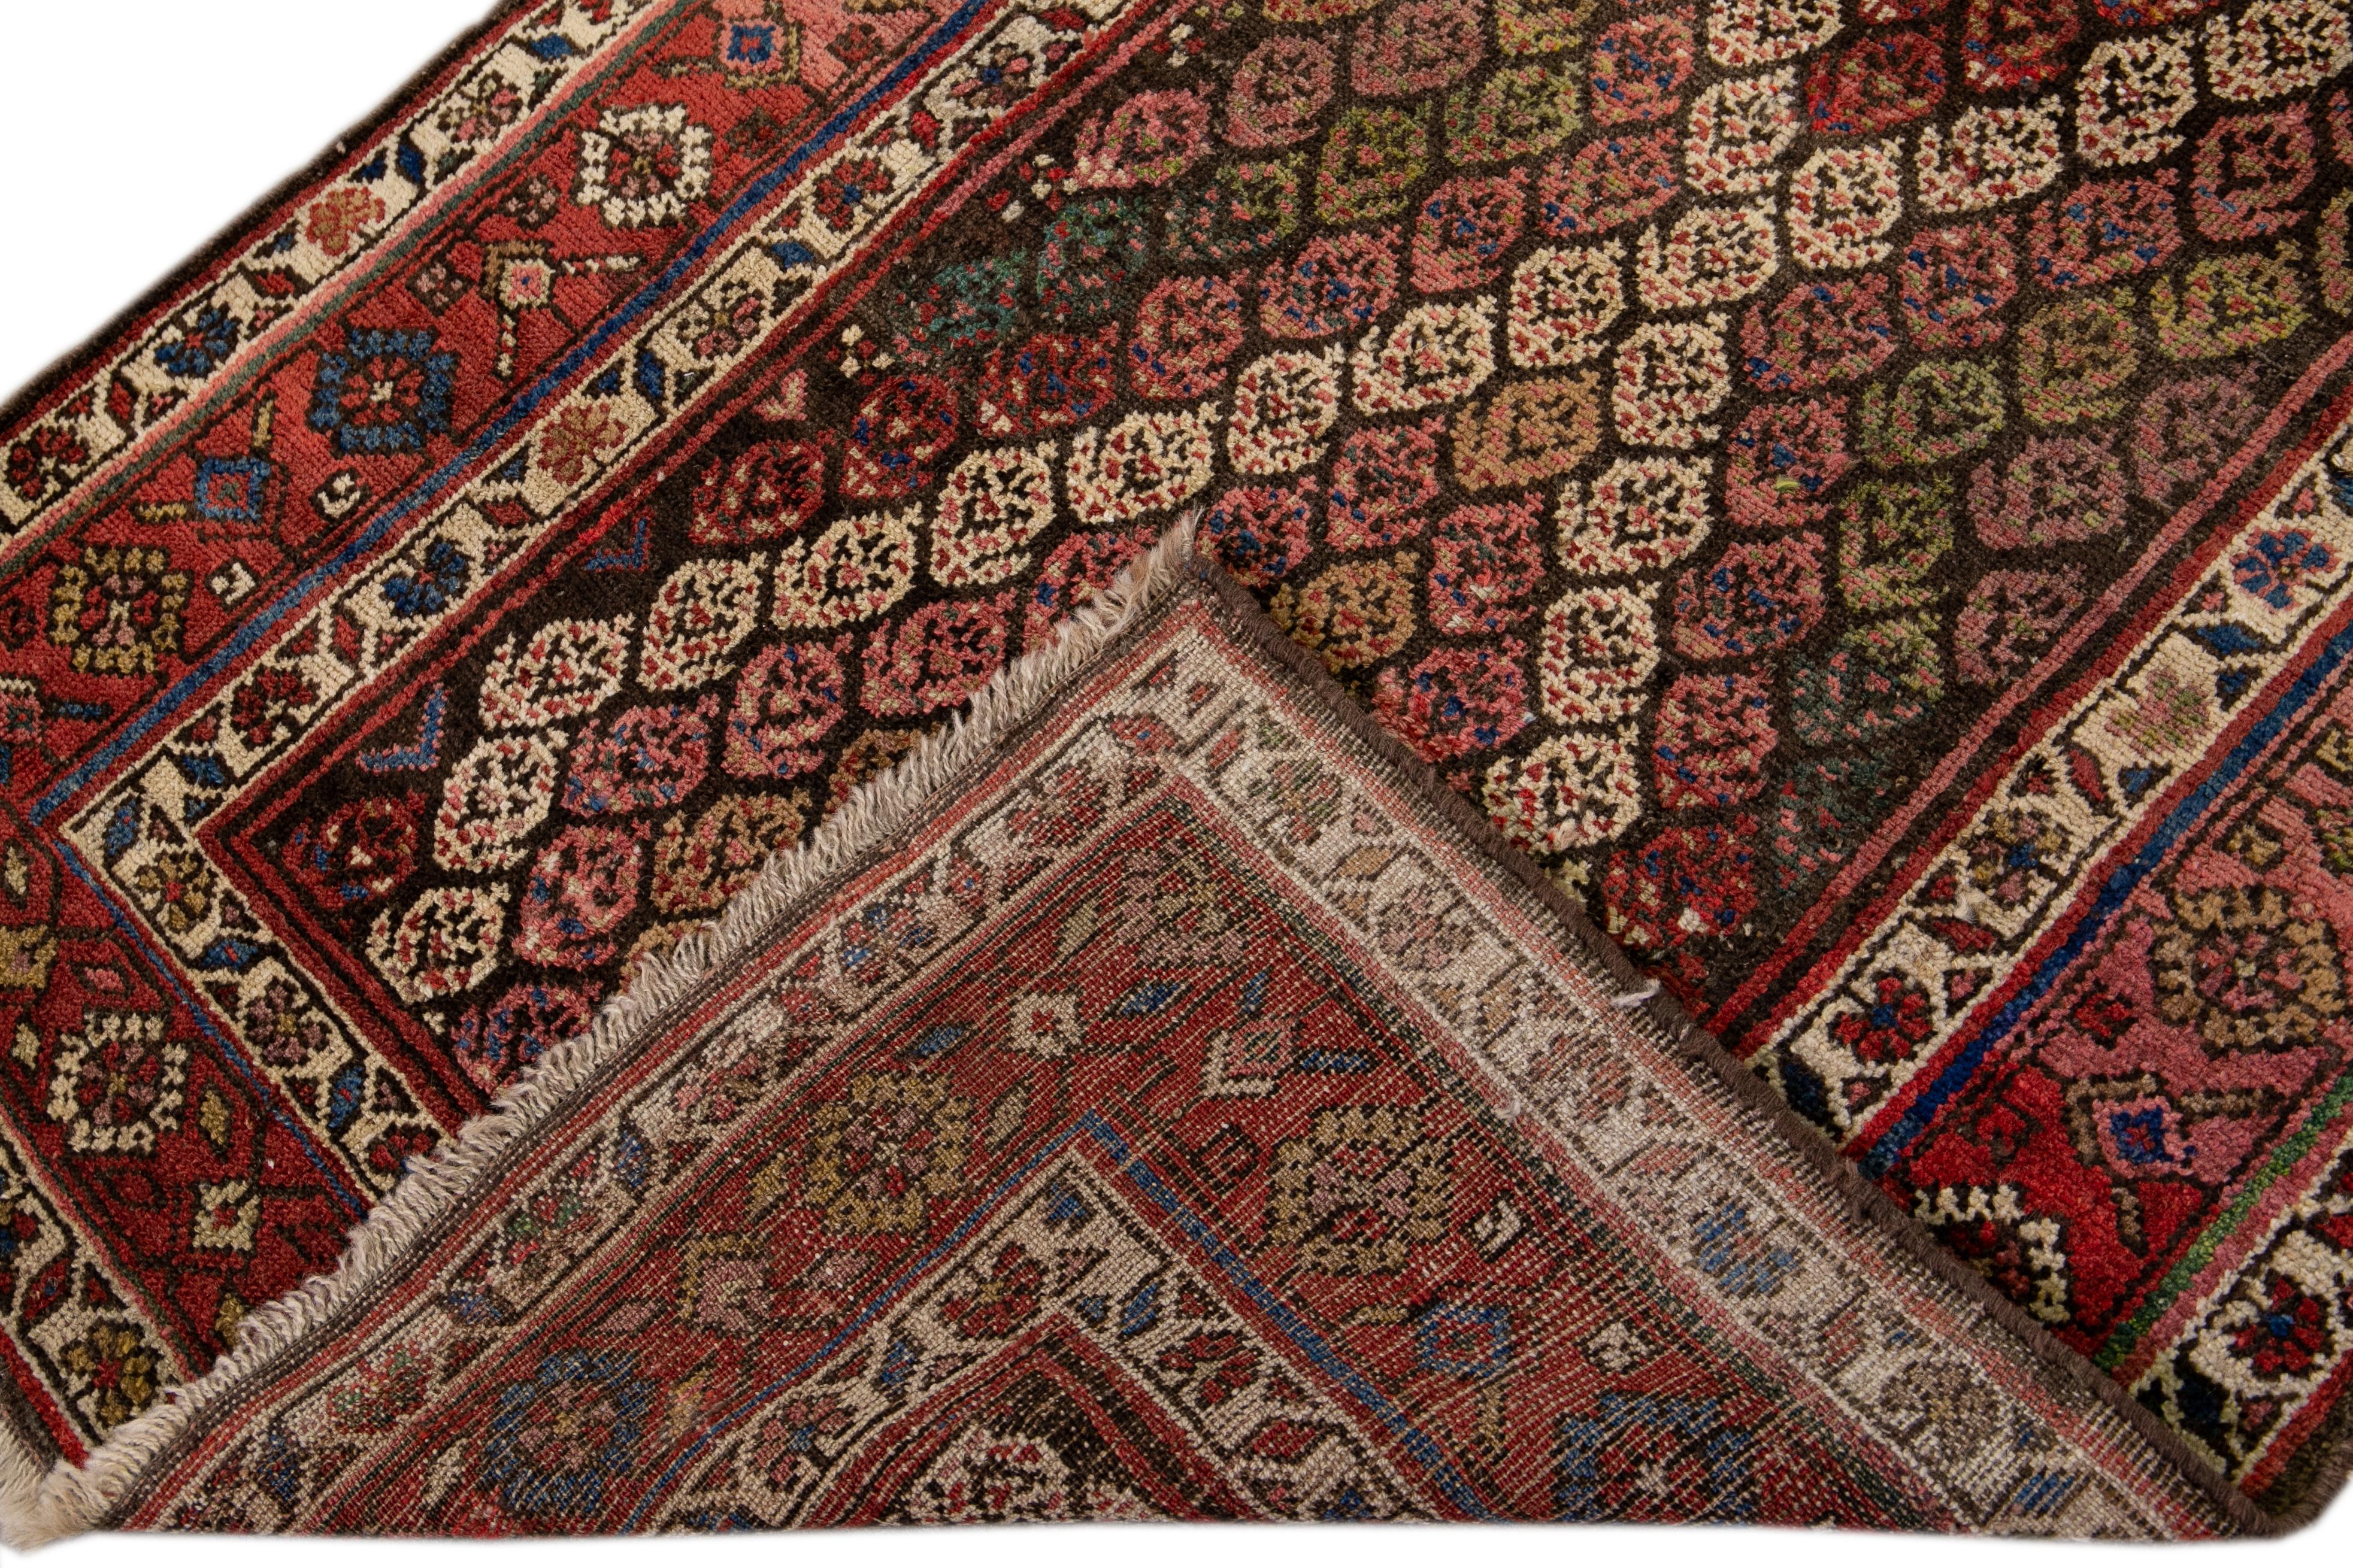 A 20th century antique Persian Kurd rug with an all-over multicolored geometric motif. This piece has fine details, great colors, and a beautiful design.

This rug measures 3'3